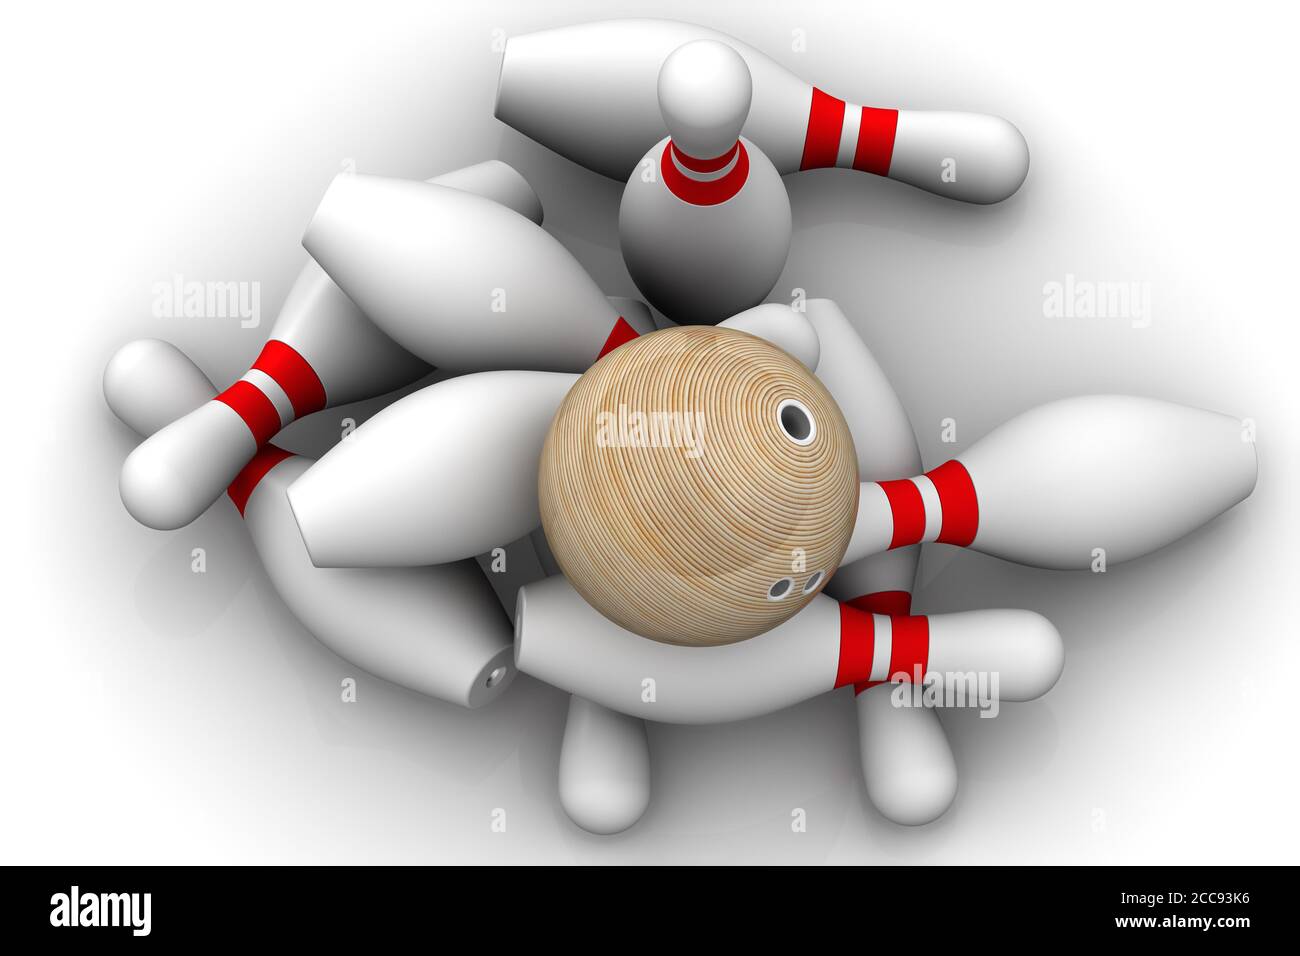 Bowling ball and skittles are on the white surface. 3D illustration Stock Photo